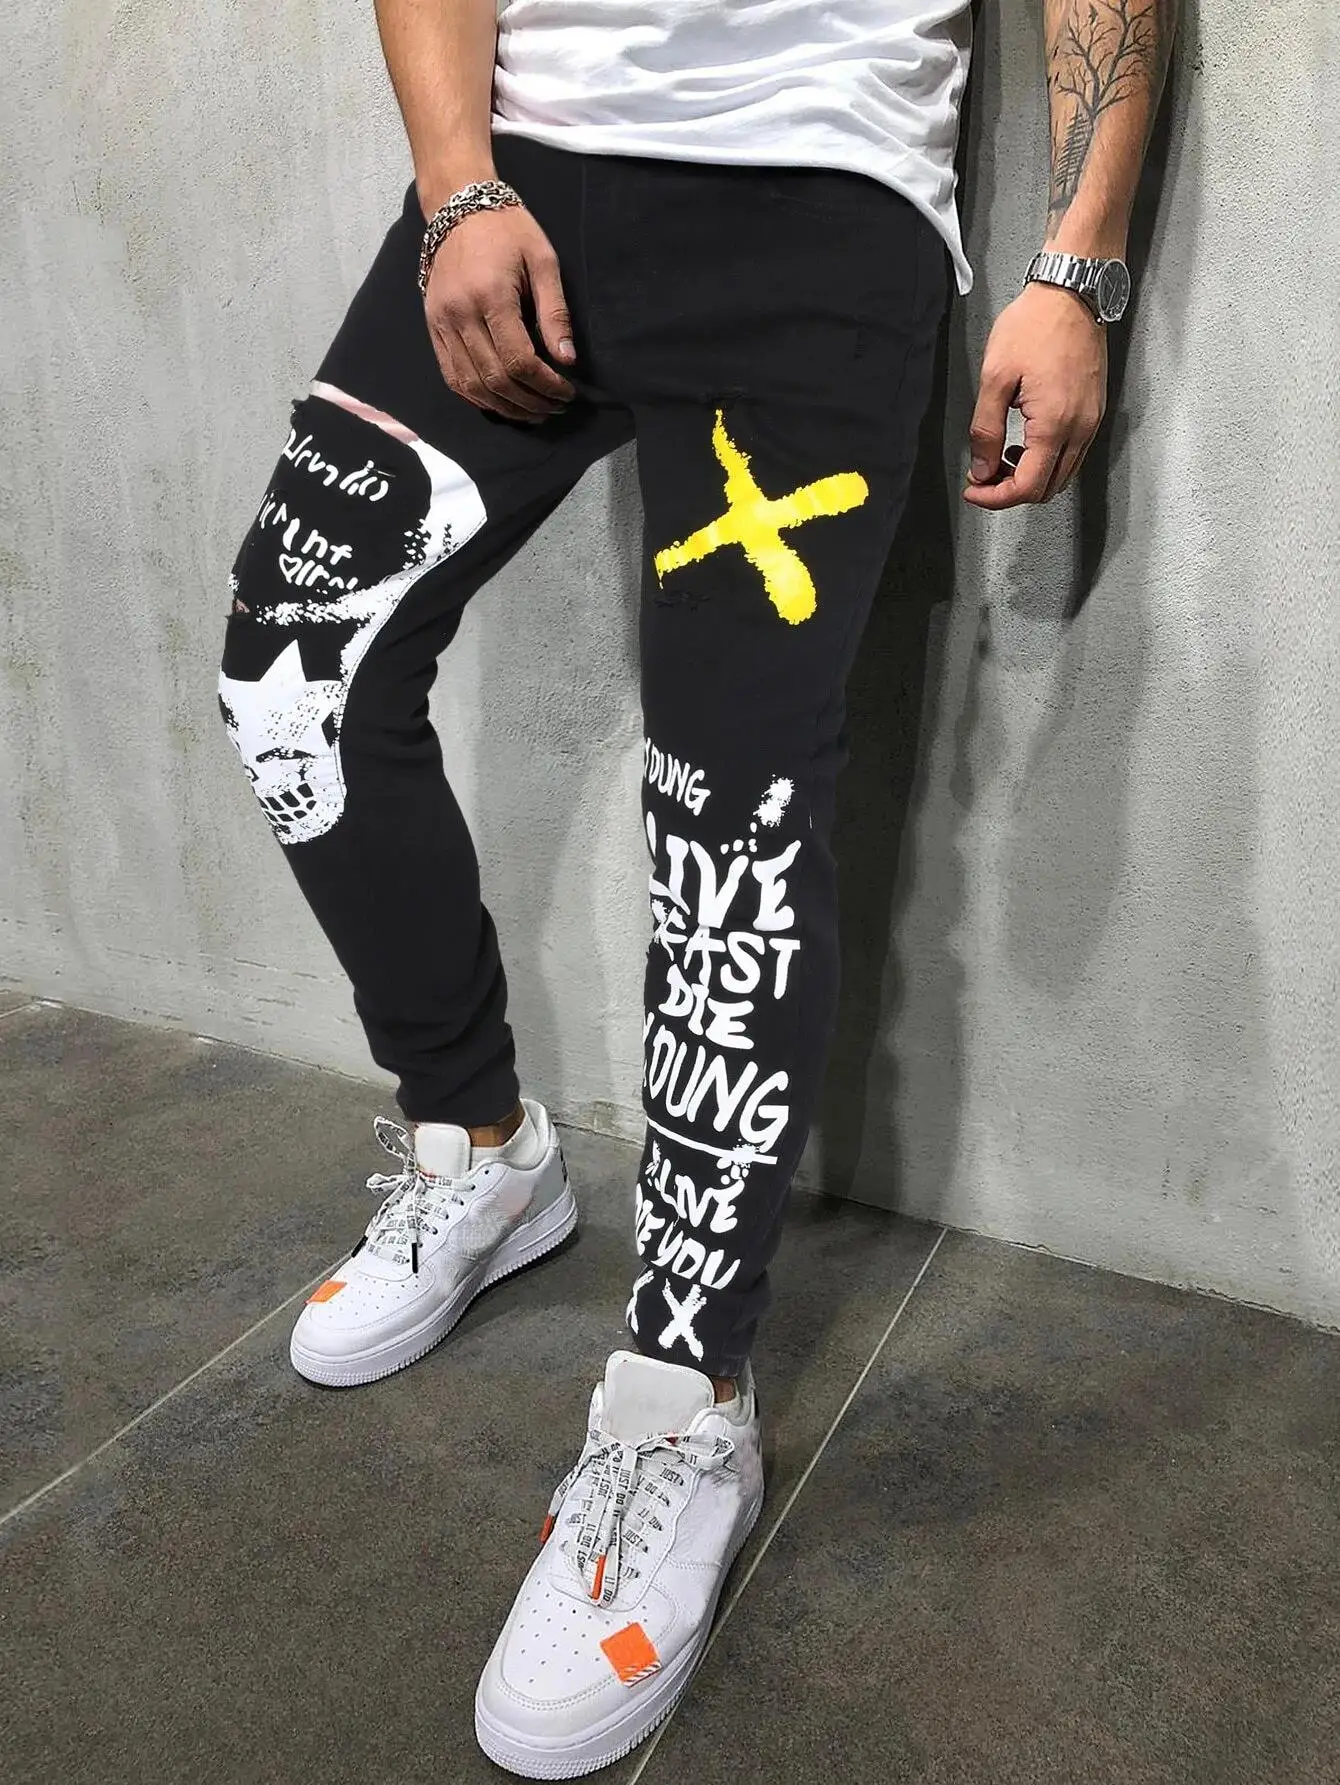 

Men's Print Ripped Stretch Denim Black Skinny Jeans Fashion Y2K Streetwear Fancy Color Letters Painted Tapered Pencil Pants